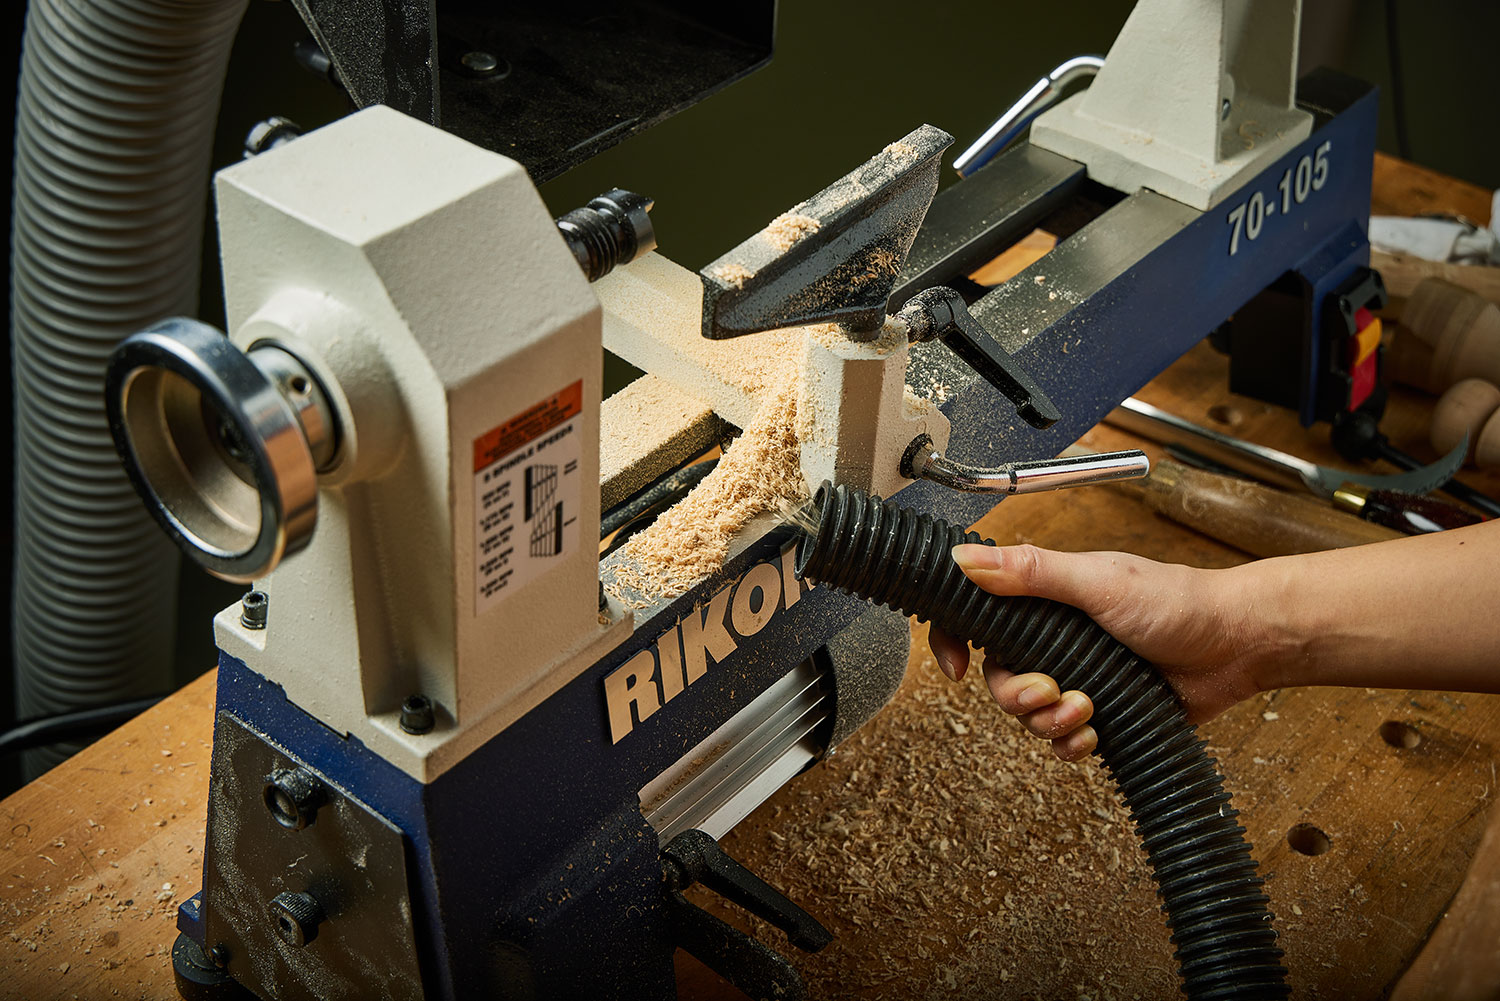 A turner uses a vacuum hose to collect accumulated wood shavings from the bed rails of a Rikon lathe